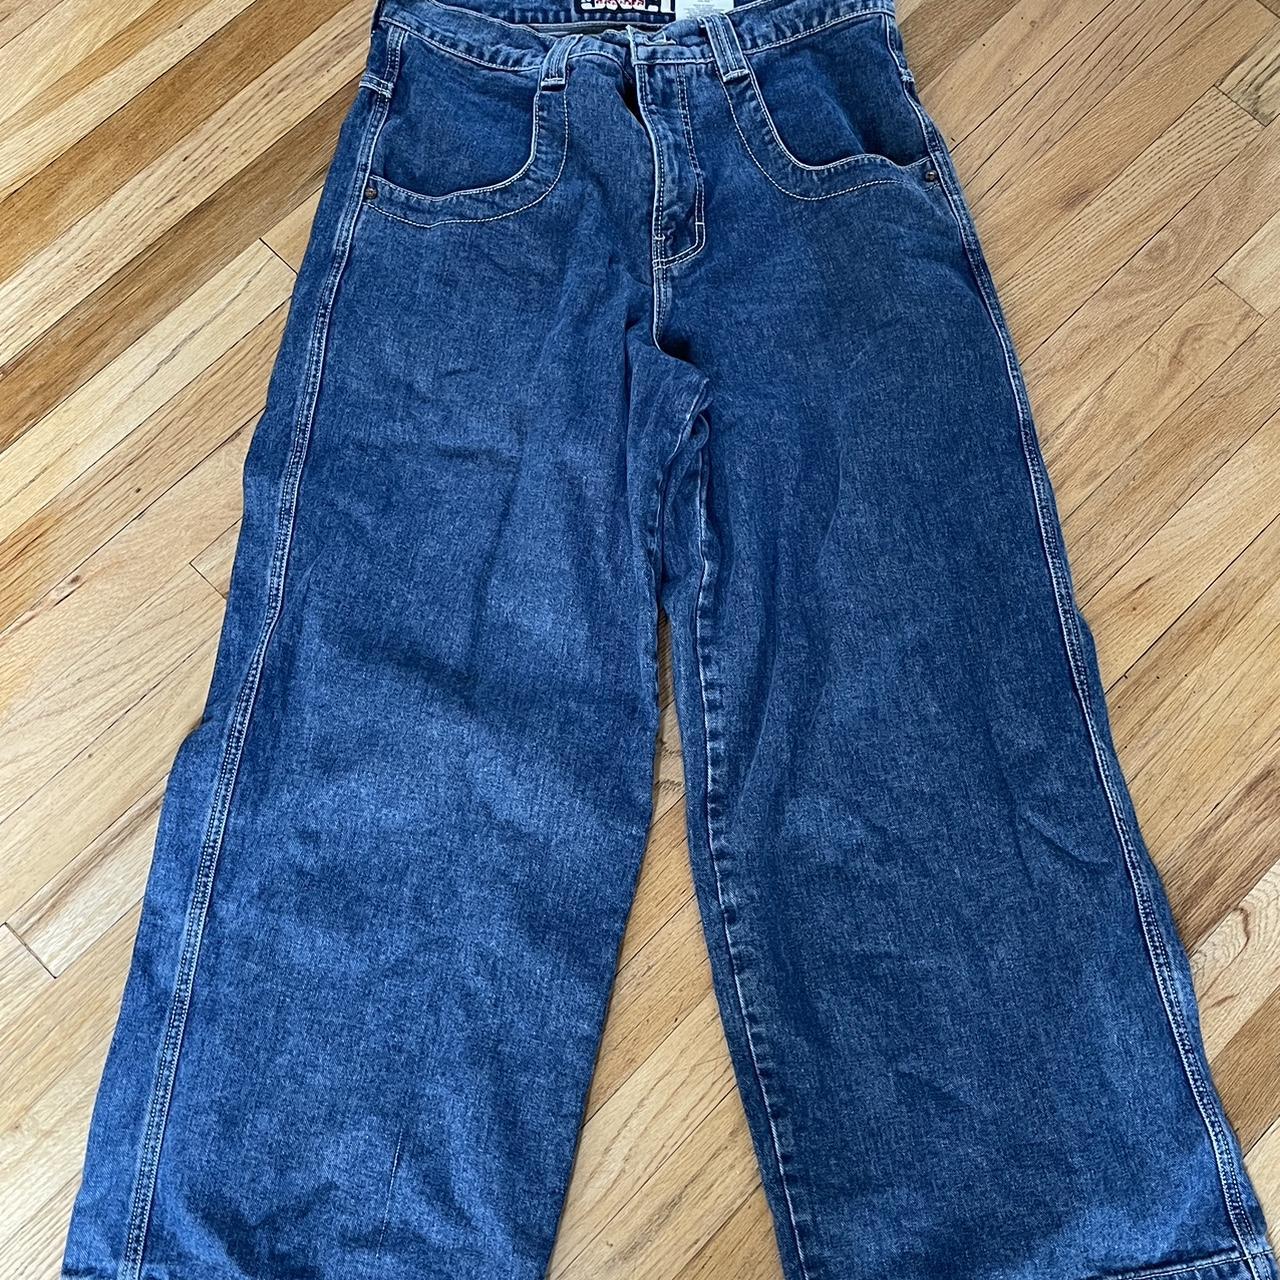 JNCO twin canons jeans 34x32 #baggy #JNCO #skater... - Depop